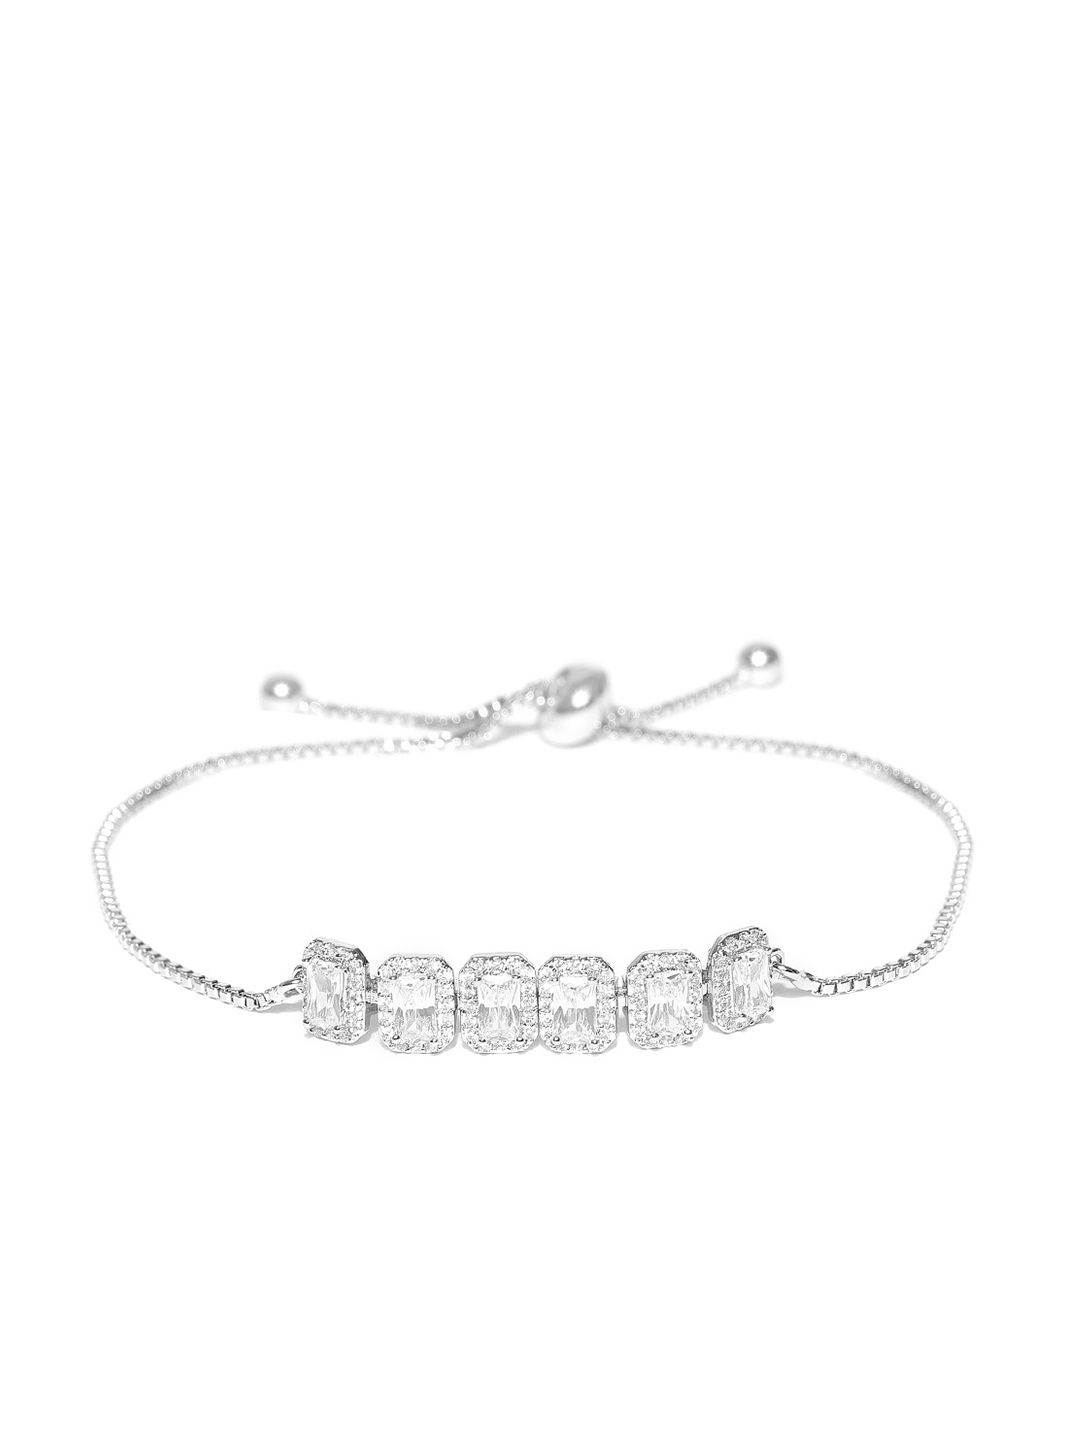 Carlton London Silver-Toned Rhodium Plated CZ Studded Bracelet Price in India